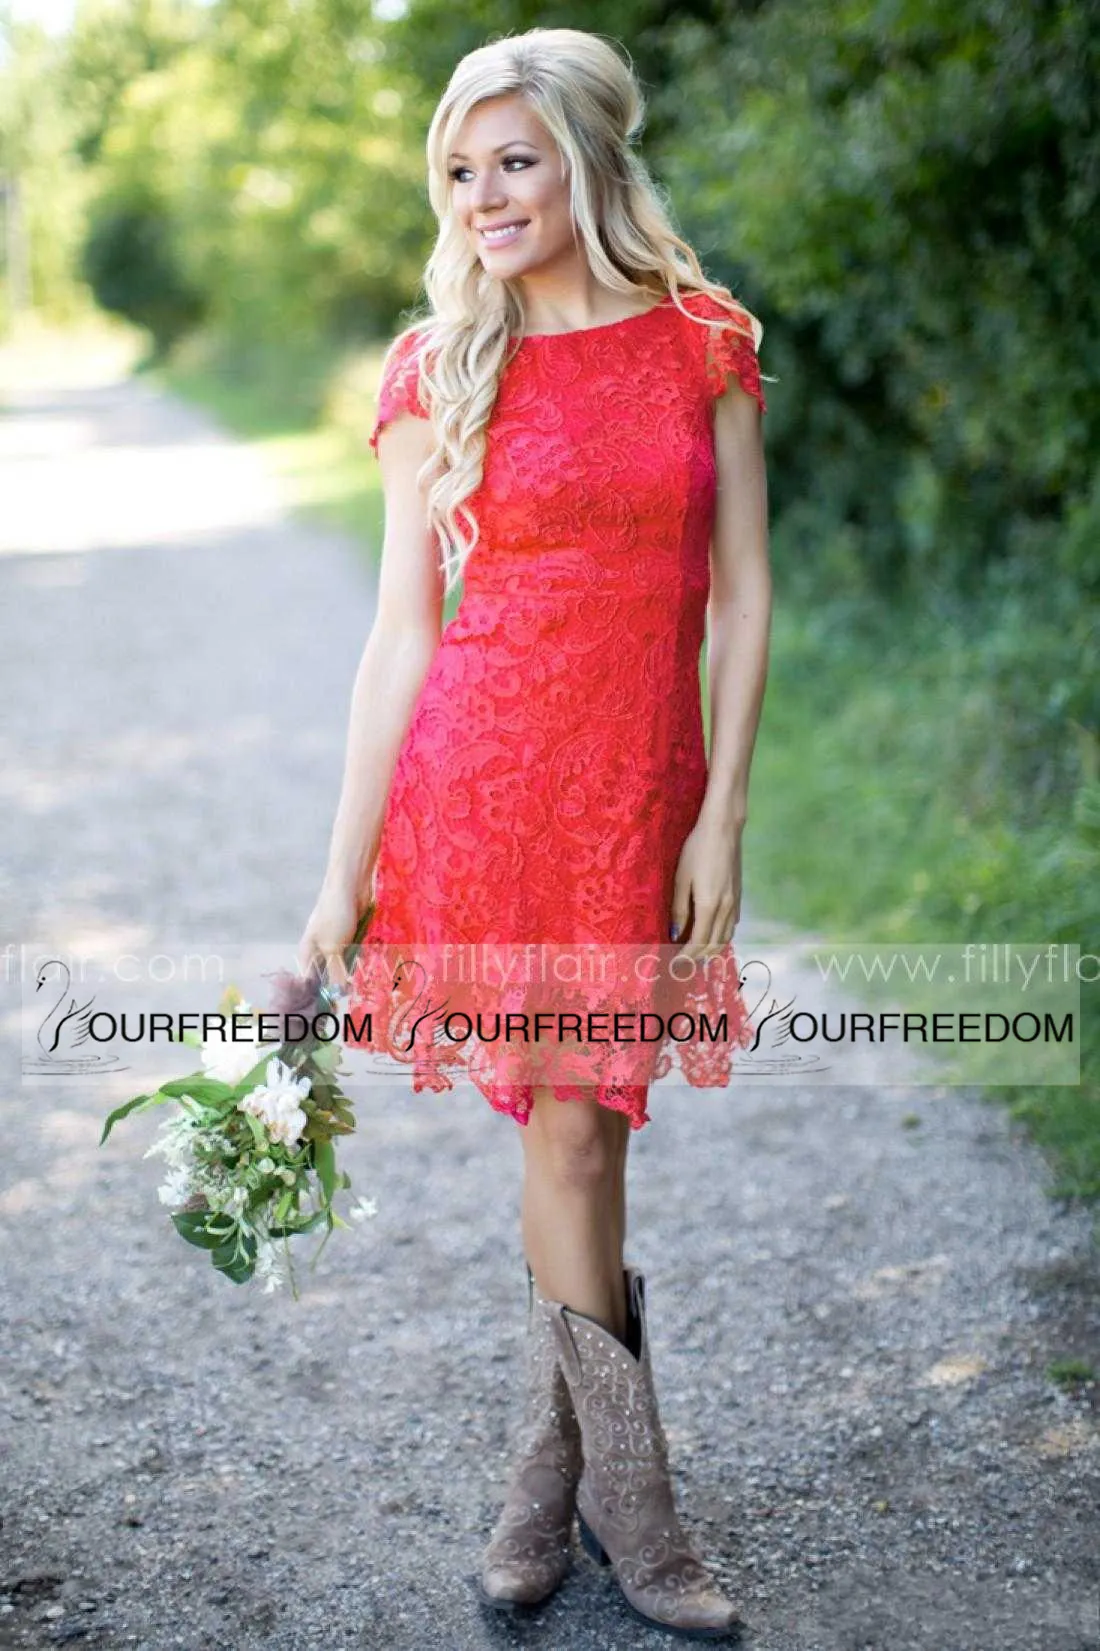 Red Full Lace Short Bridesmaid Dresses Cheap Western Country Style Crew Neck Cap Sleeves Mini Backless Homecoming Cocktail Dresses6417929